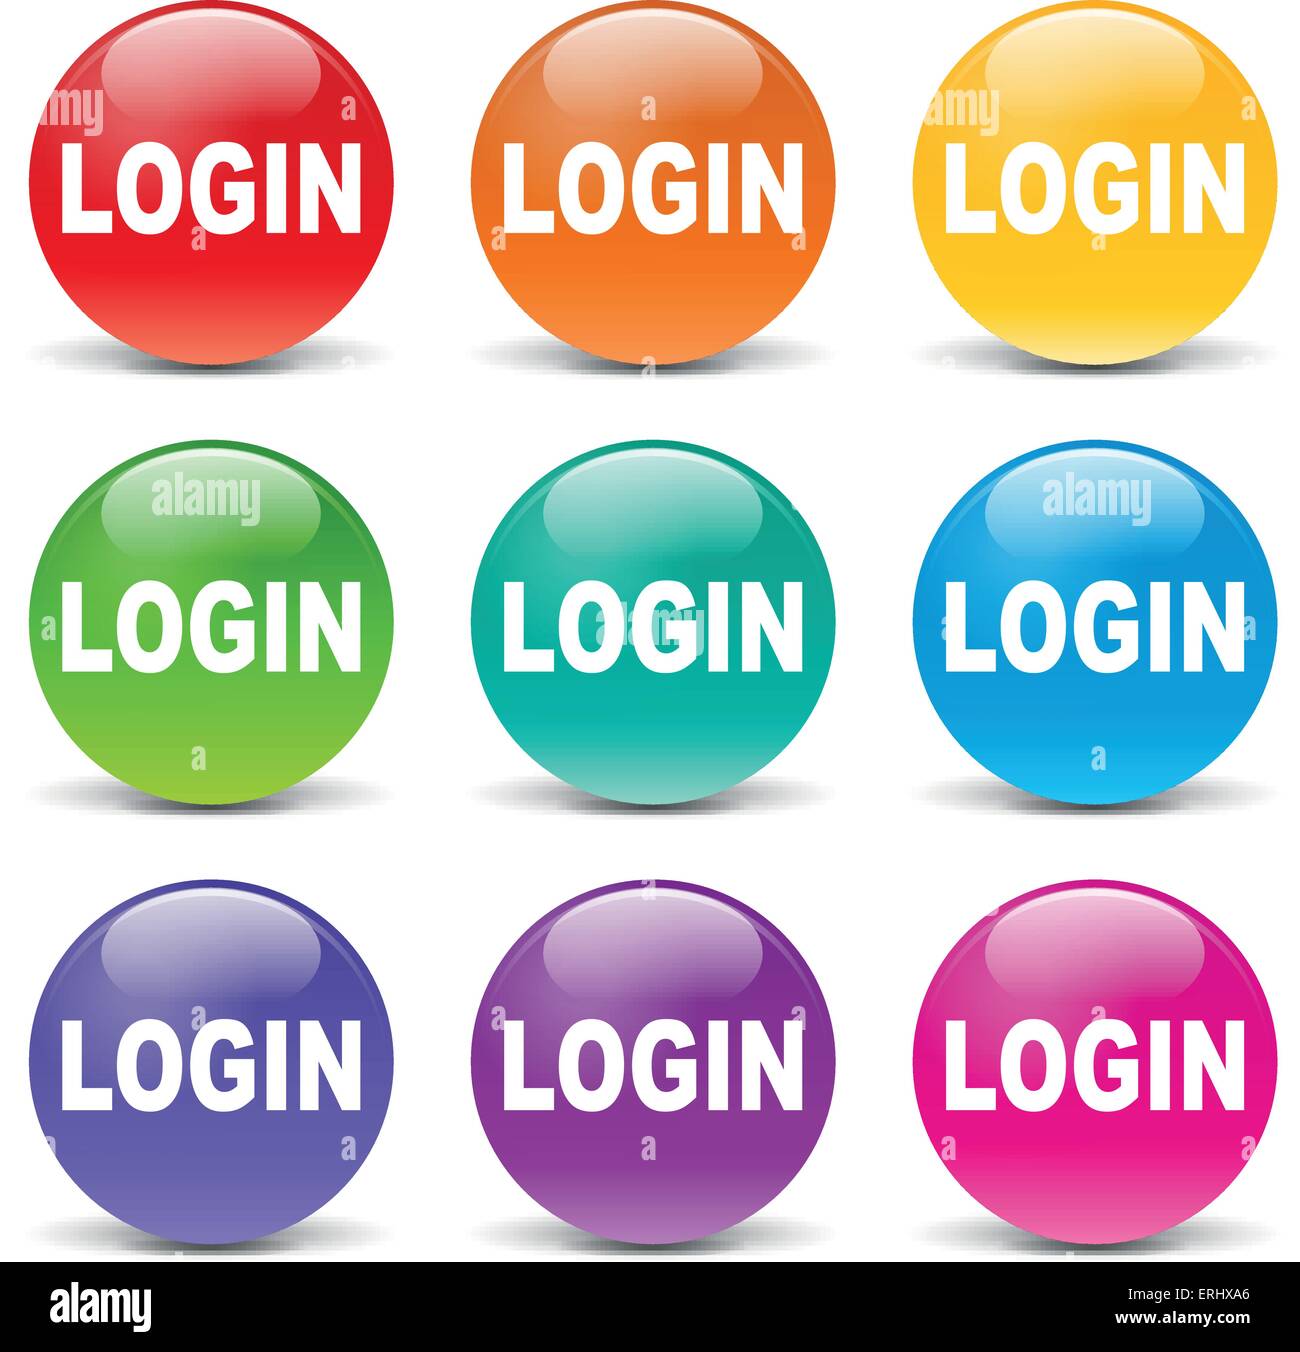 Vector illustration of login set icons on white background Stock Vector